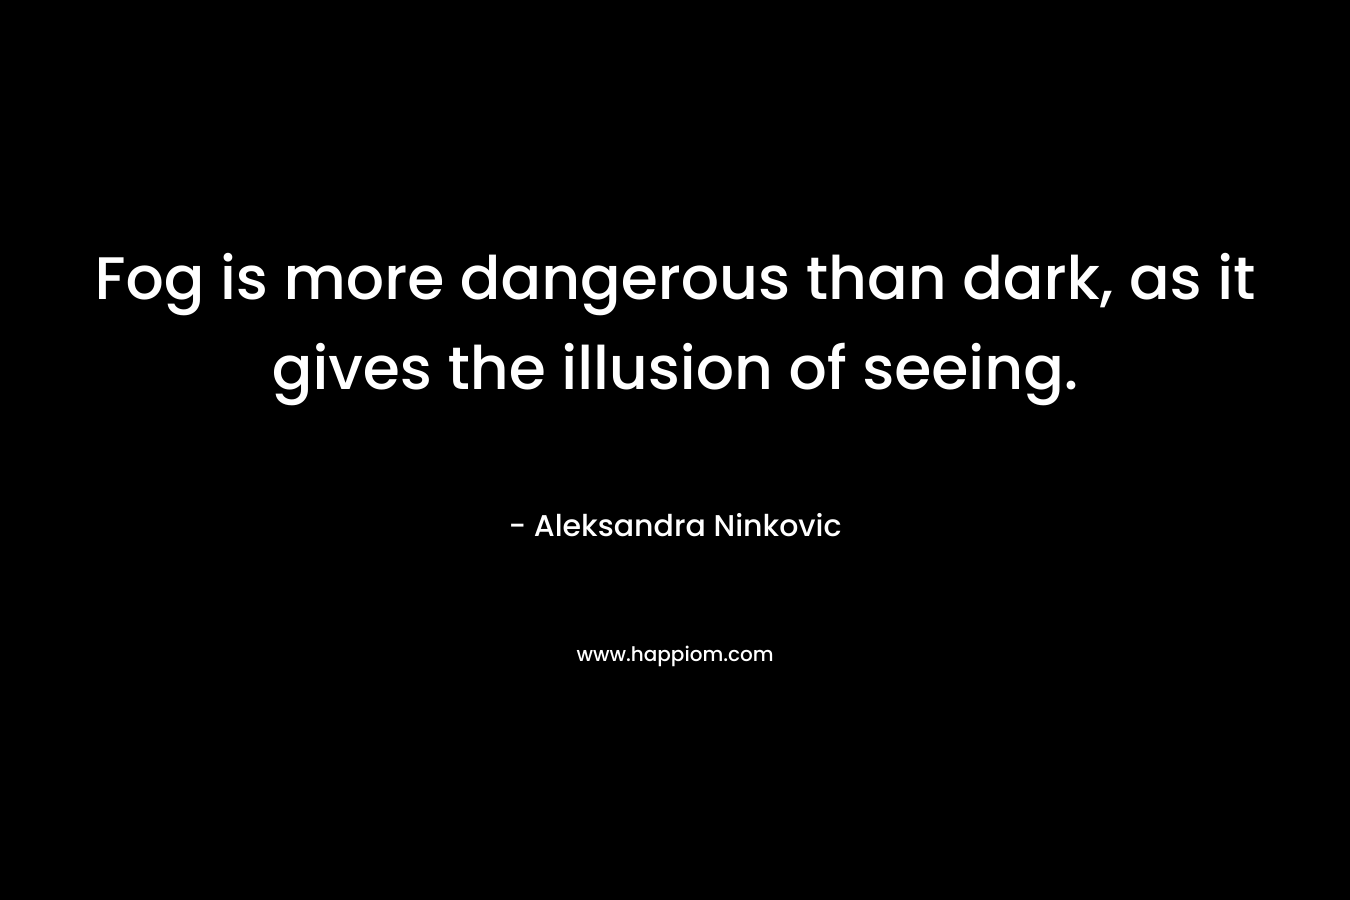 Fog is more dangerous than dark, as it gives the illusion of seeing.